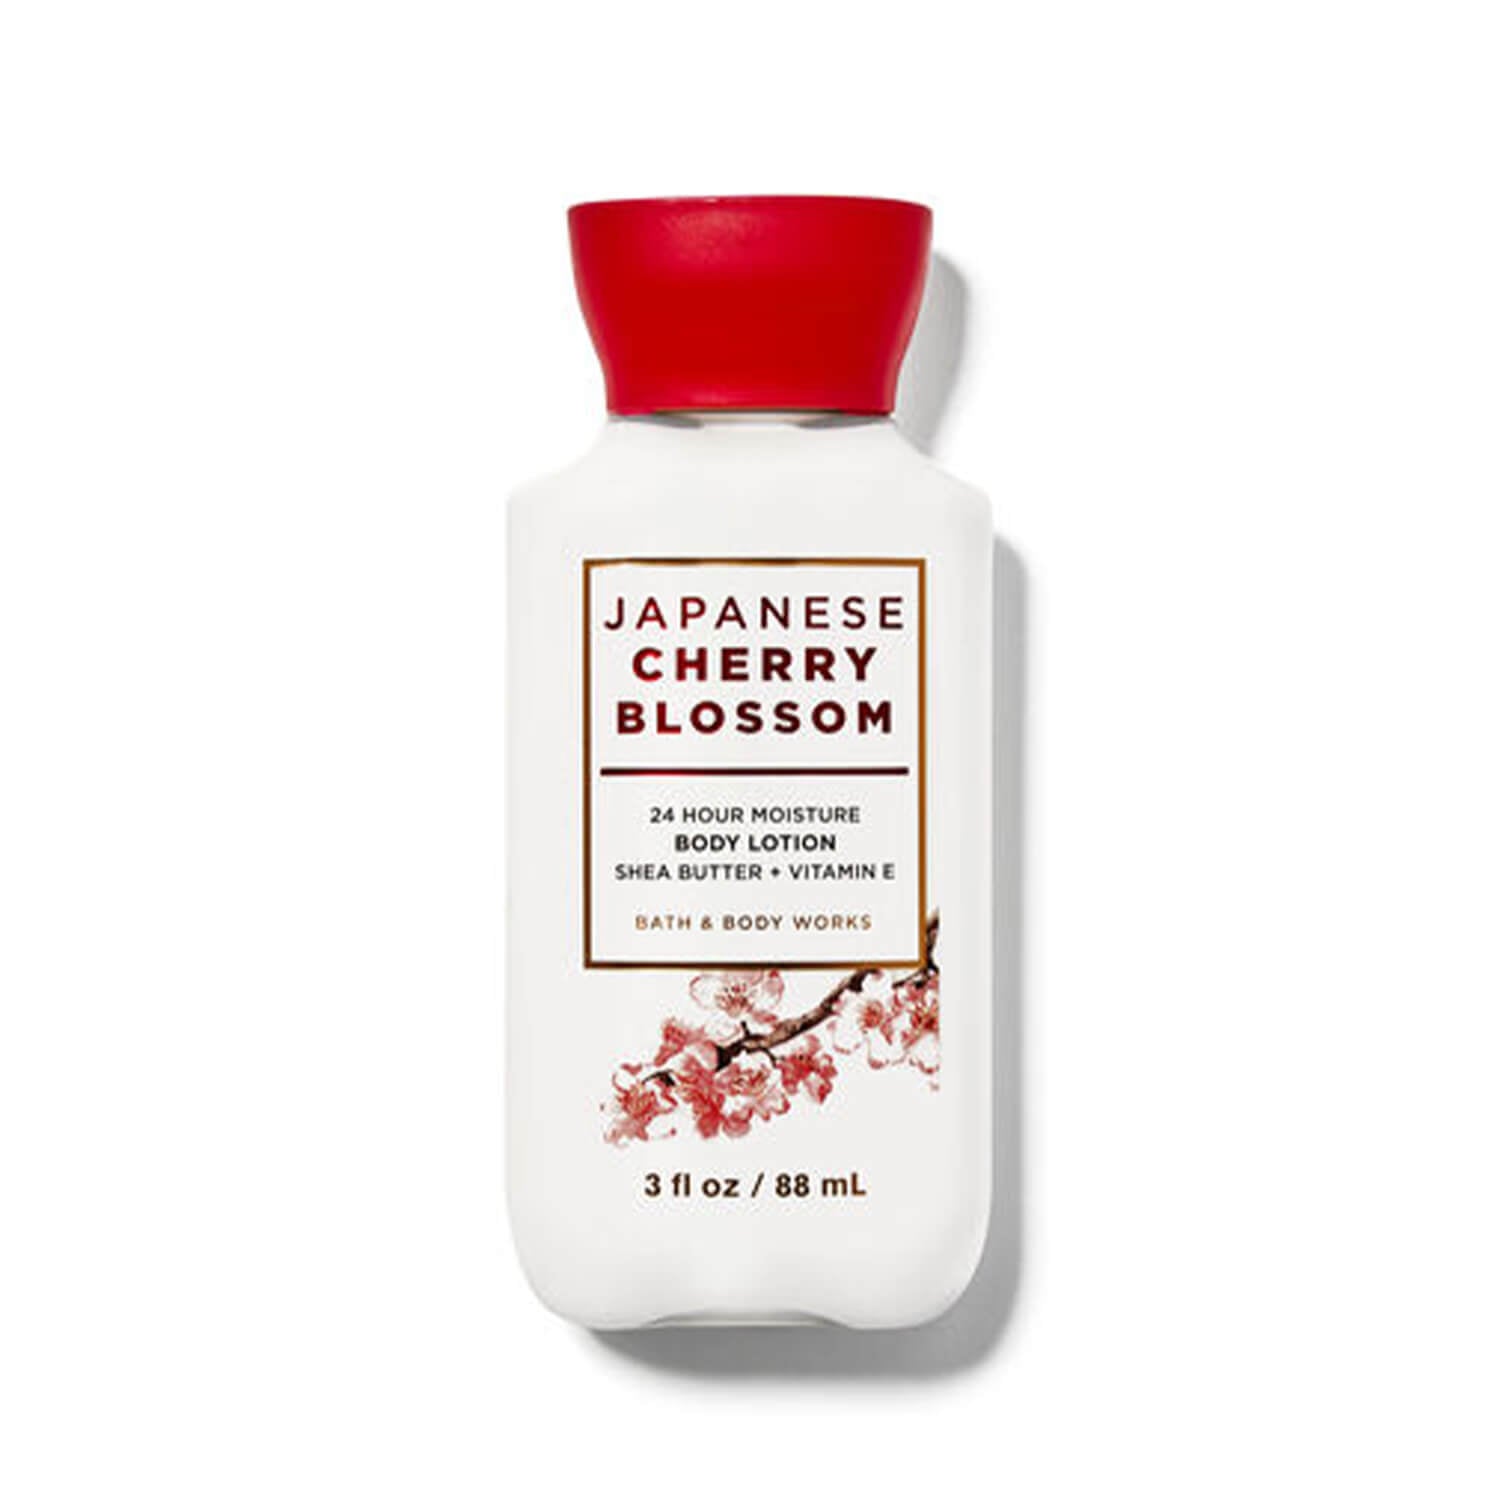 shop bath and body works body lotion in Japanese cherry blossom fragrance available at heygirl.pk for delivery in Pakistan